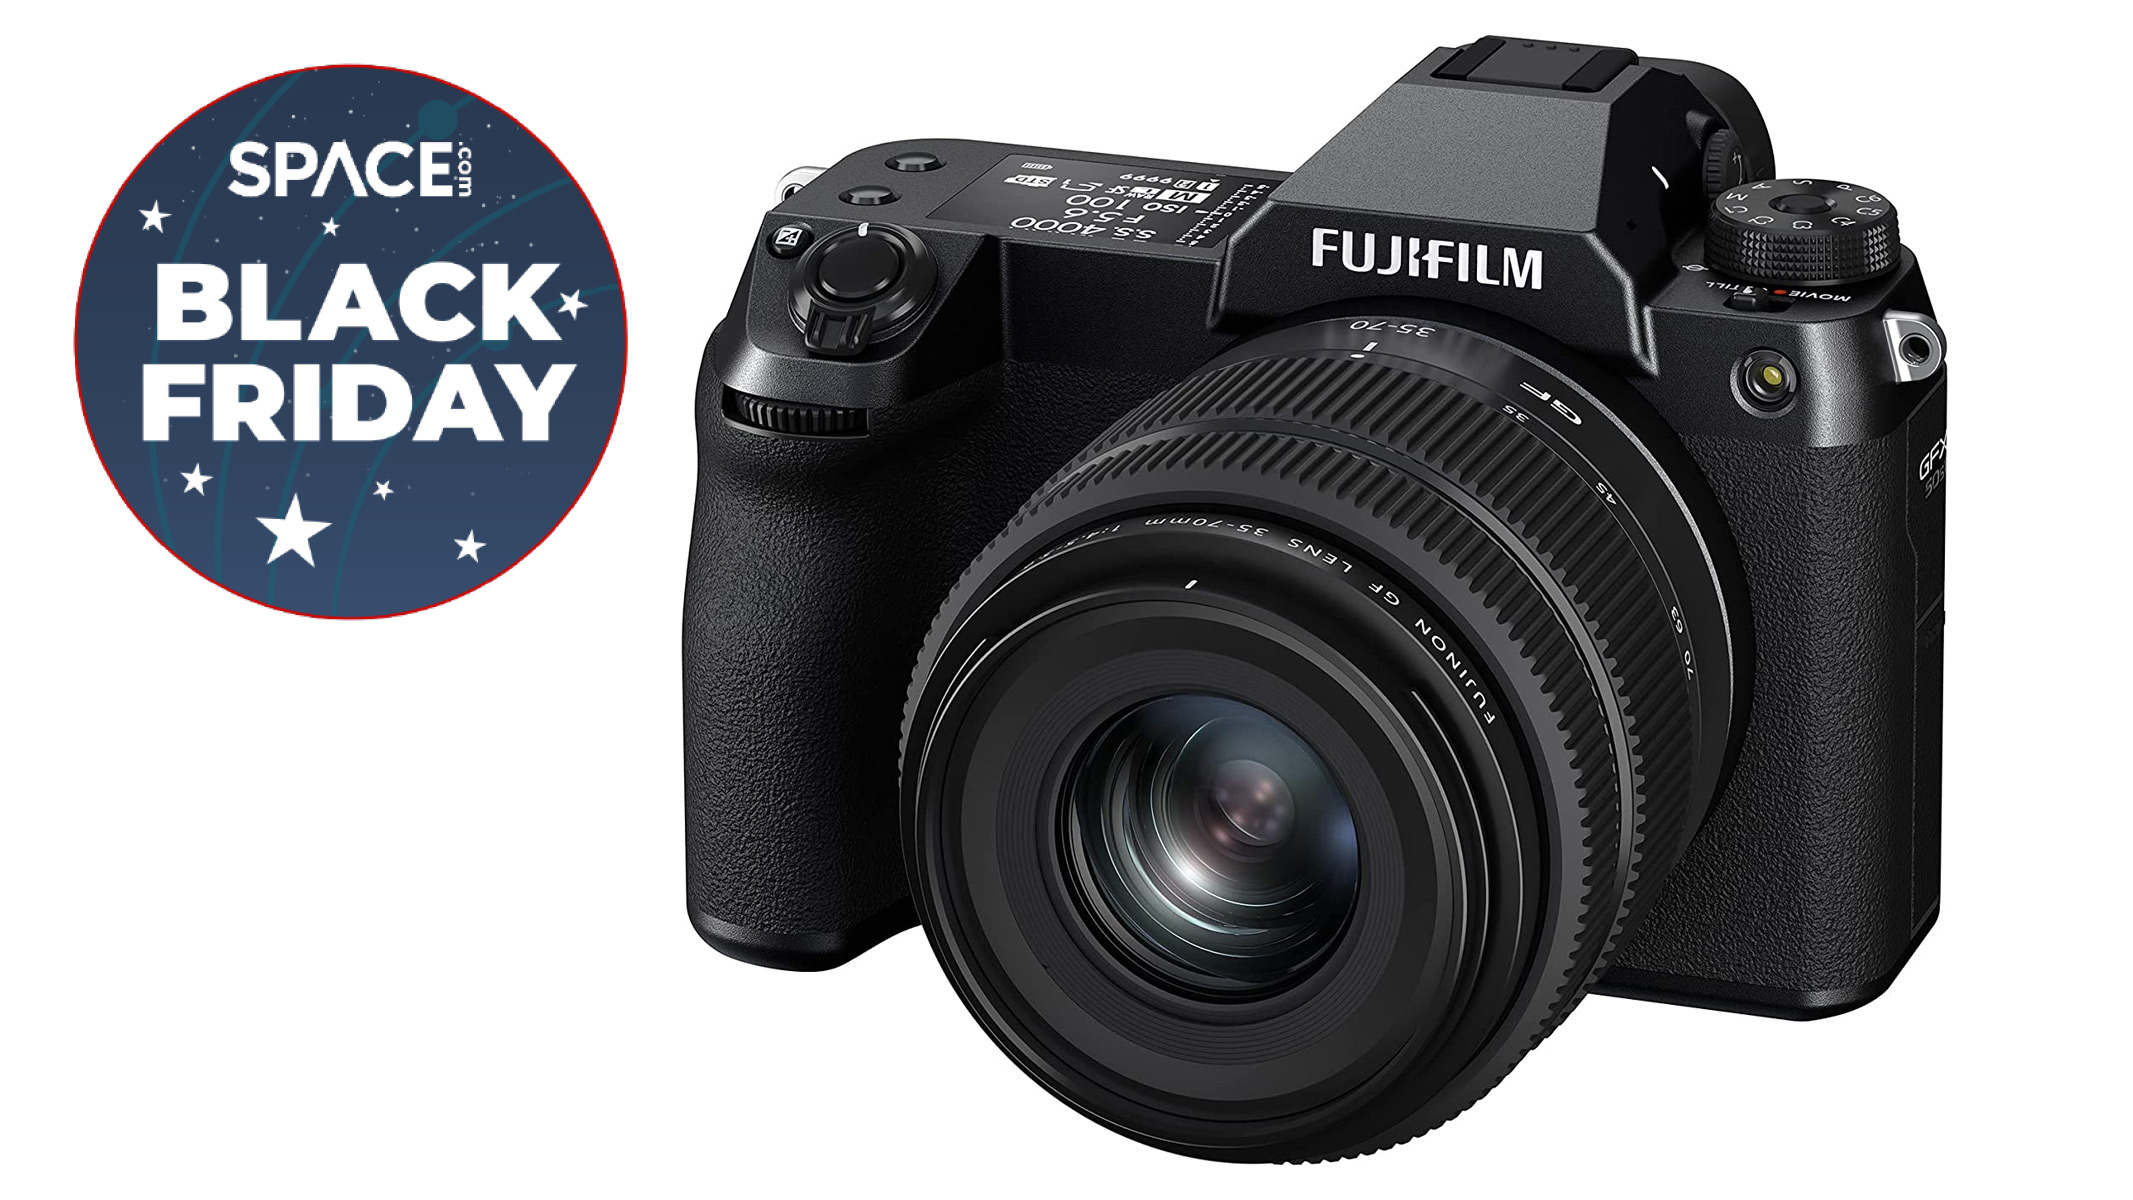 The Fujifilm GFX50S II is a huge $800 off this Cyber Monday Space